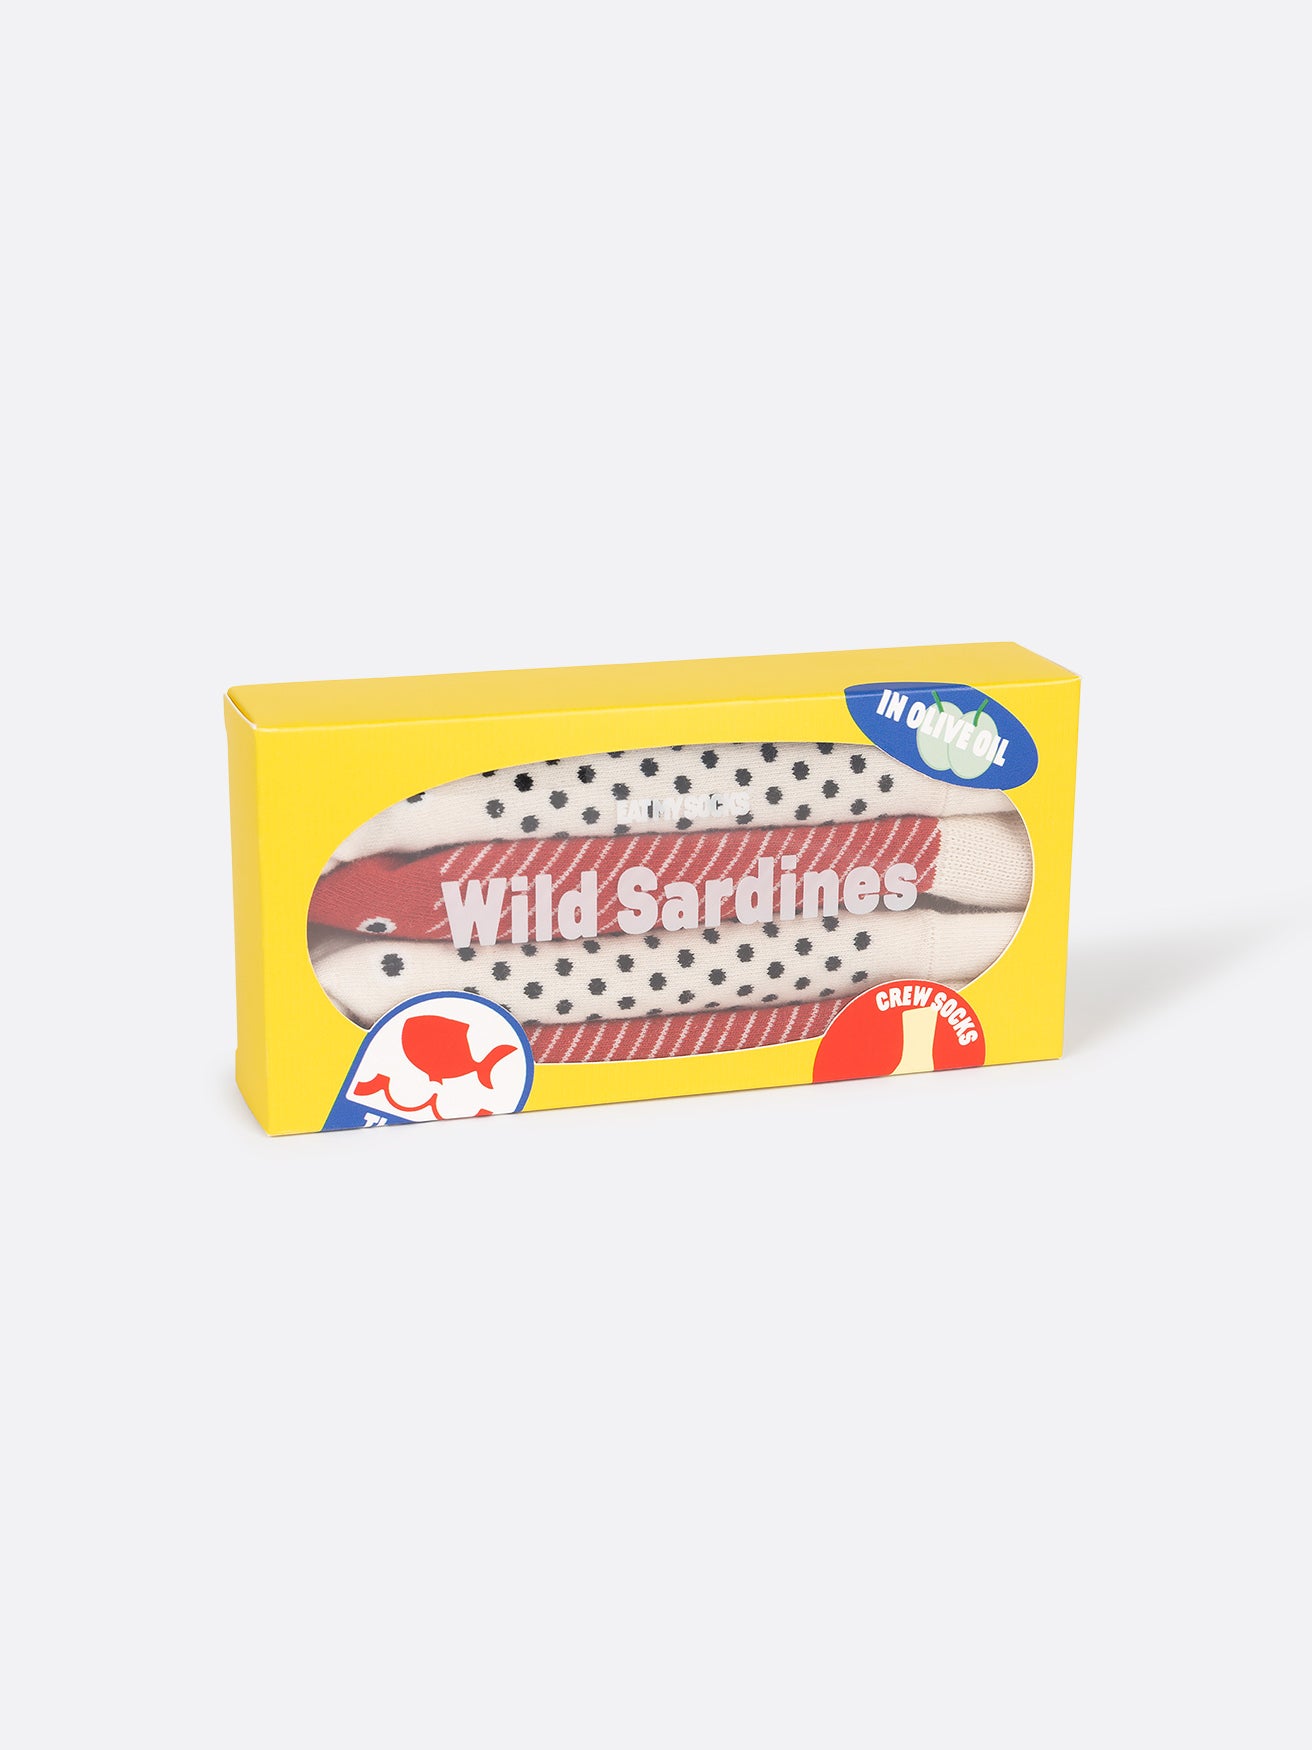 Wild Sardine socks packaged in a box resembling a tin can 